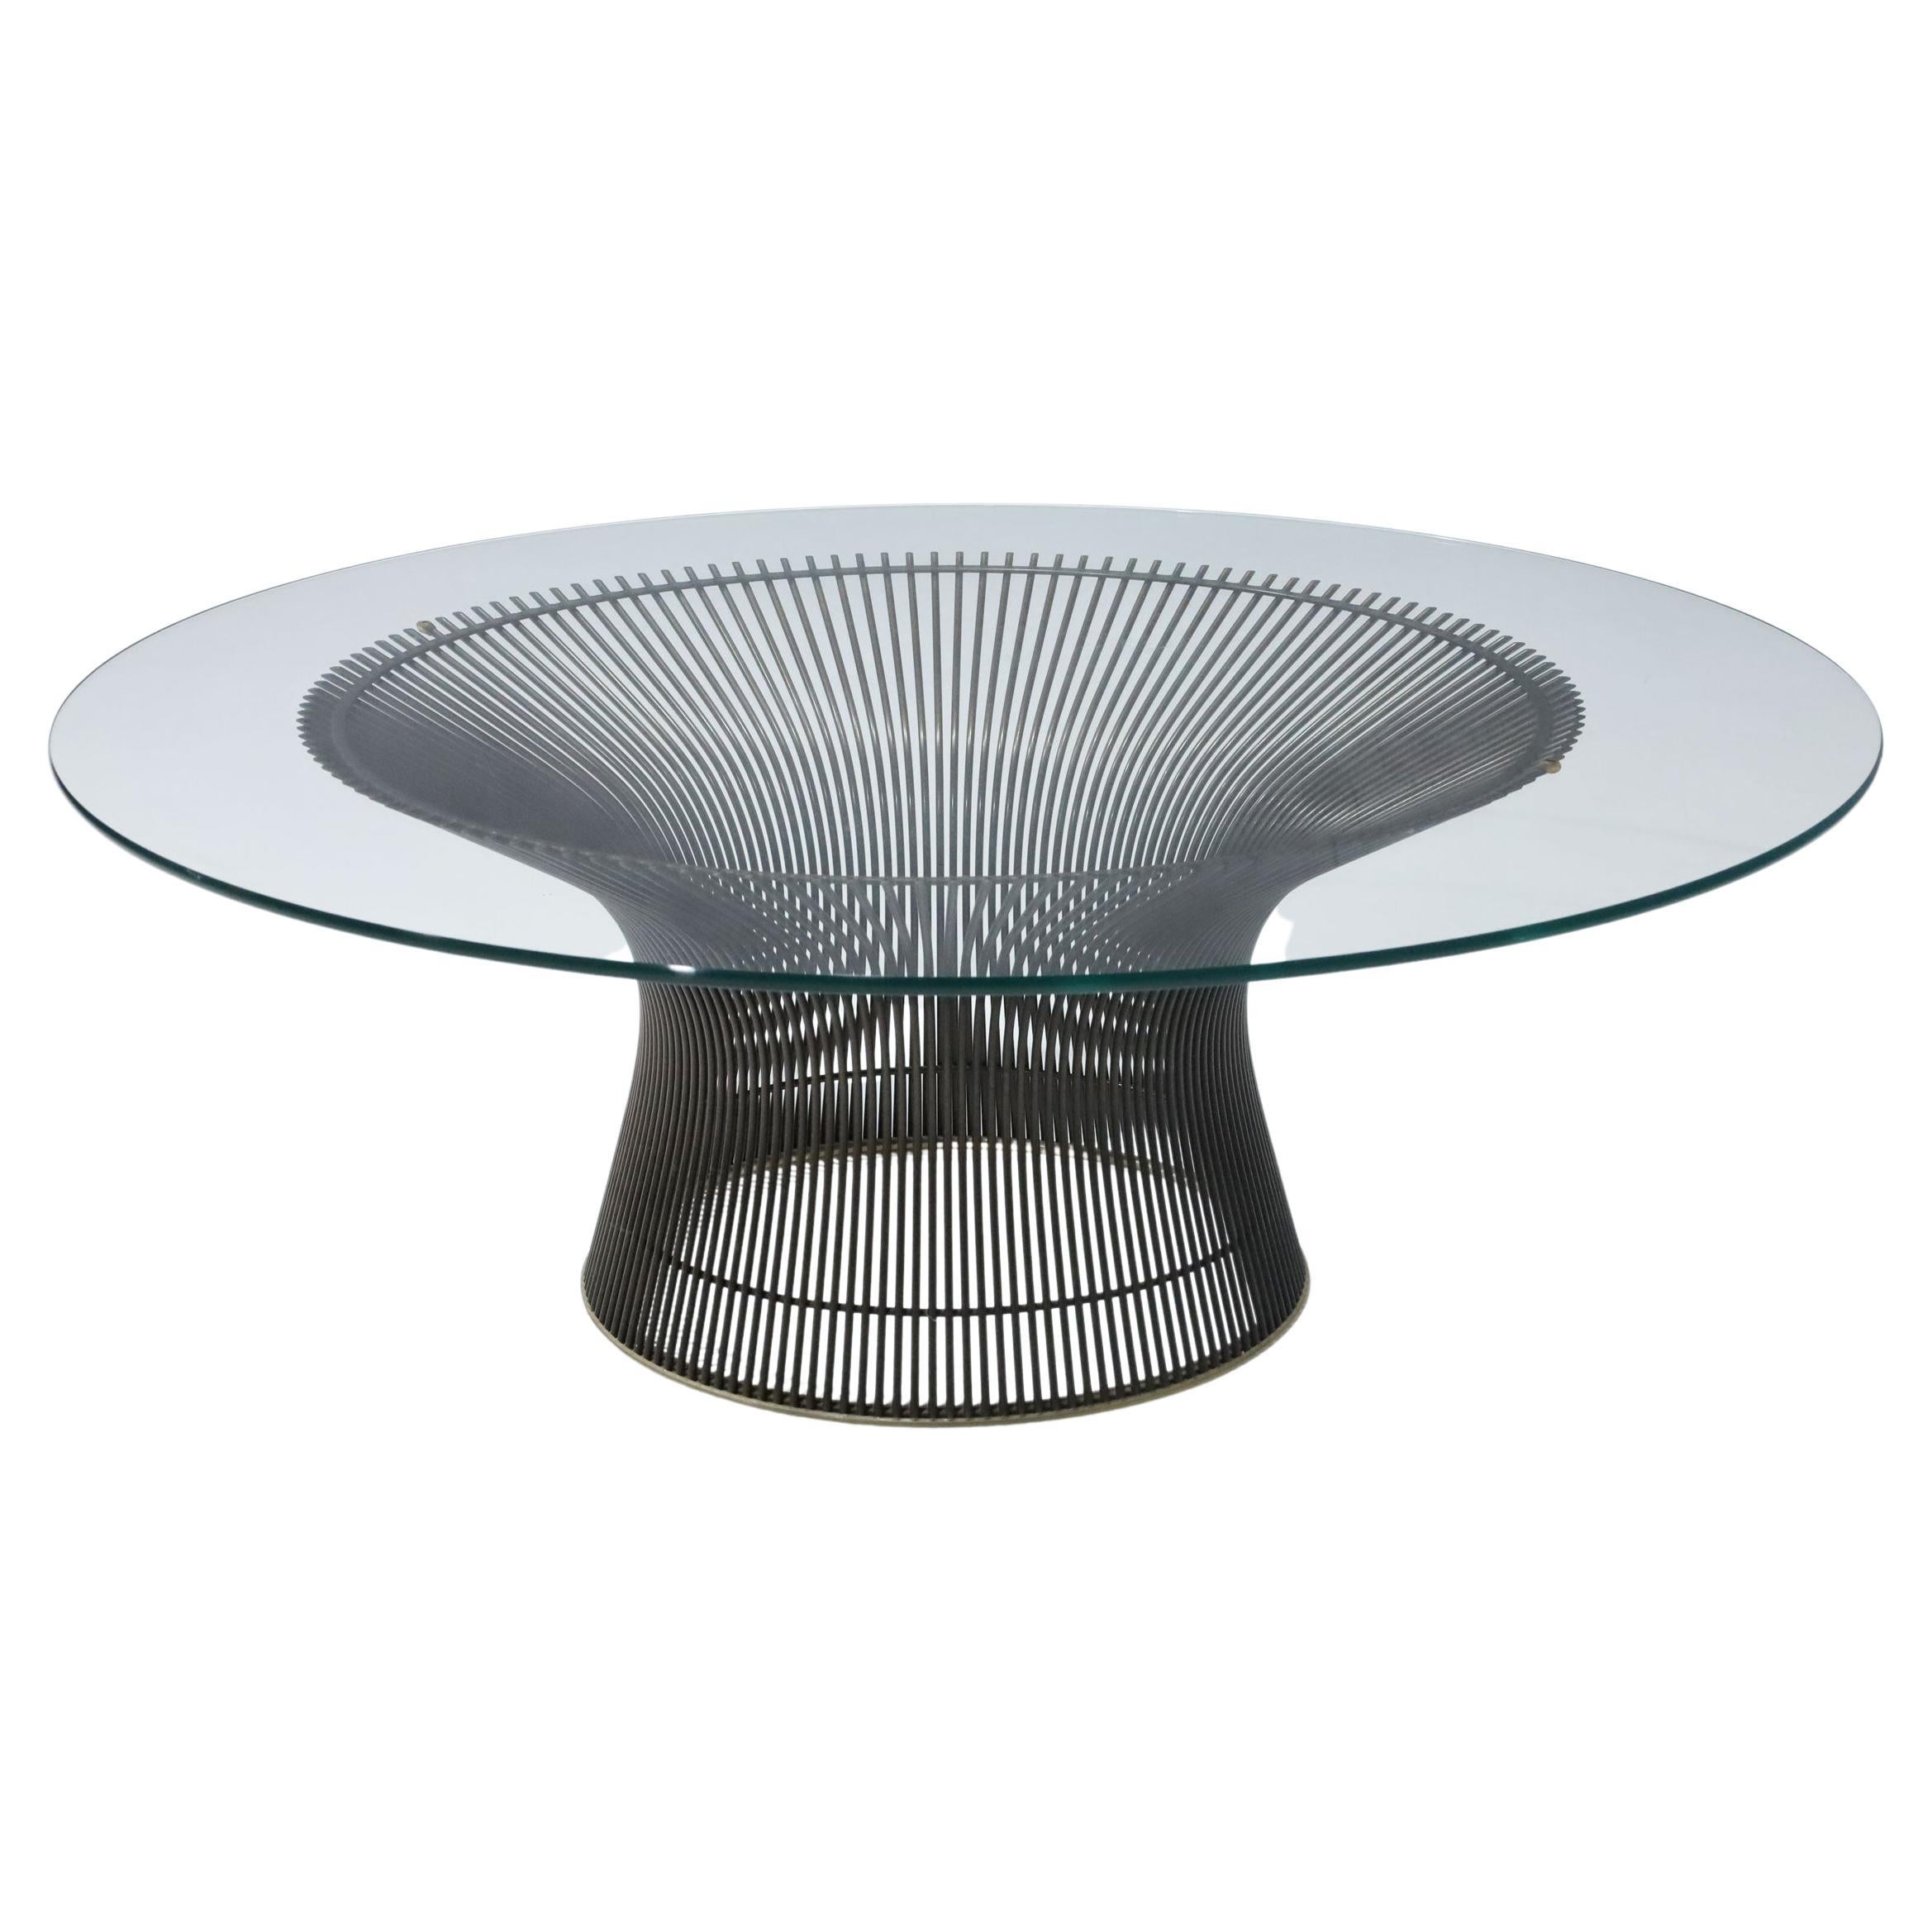 Warren Platner for Knoll Bronze Base Coffee Table with Beveled Glass Top